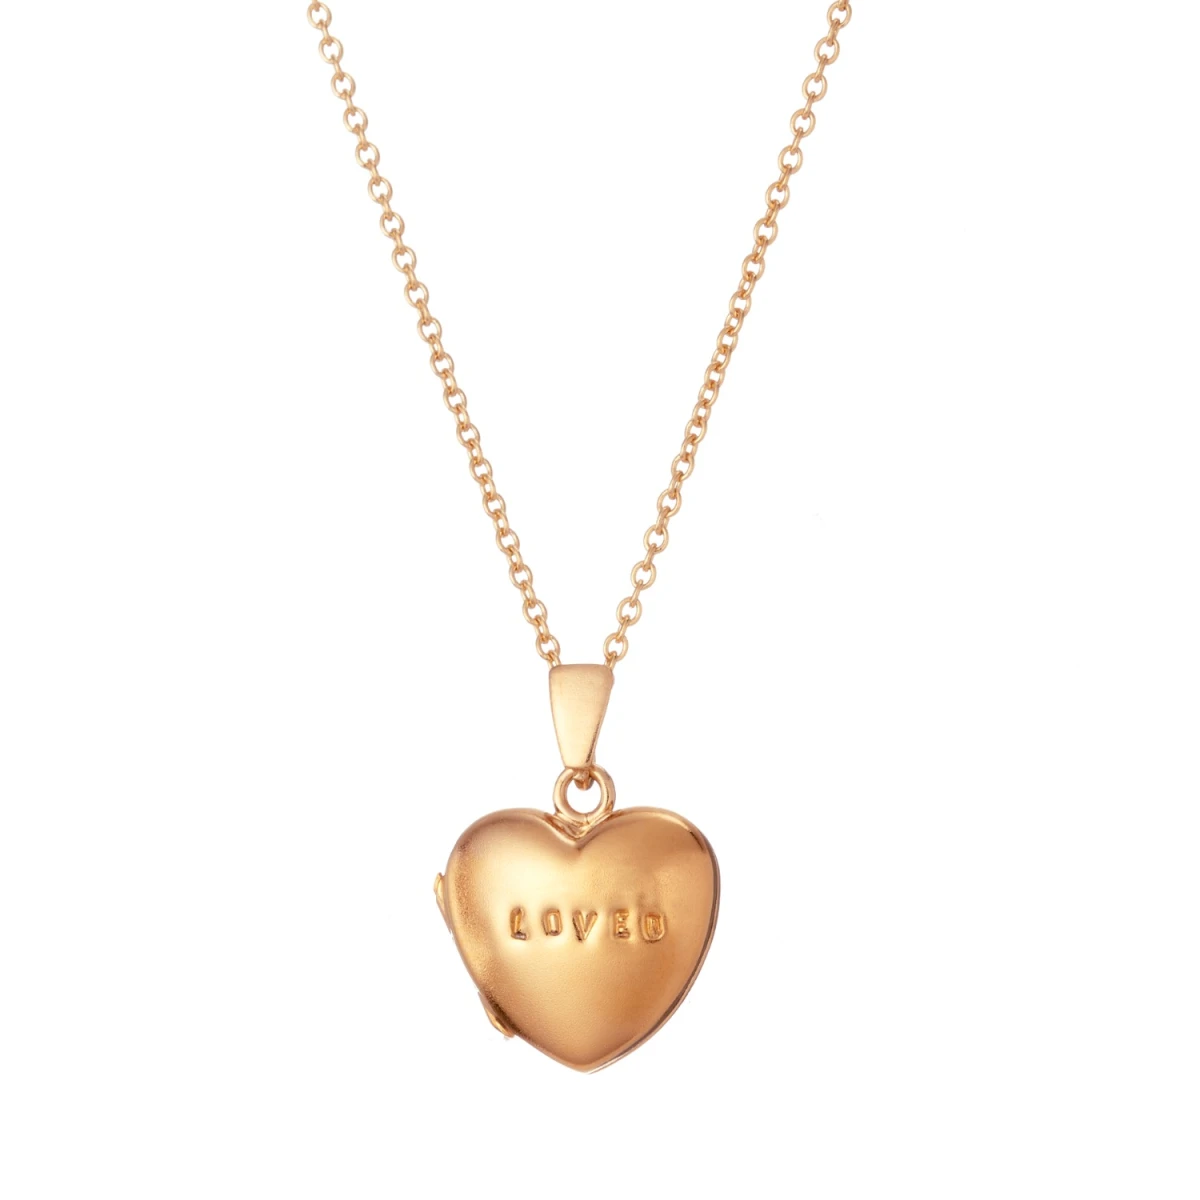 Posh Totty Designs Gold Plated  'LOVED'  Mini Heart Locket Necklace